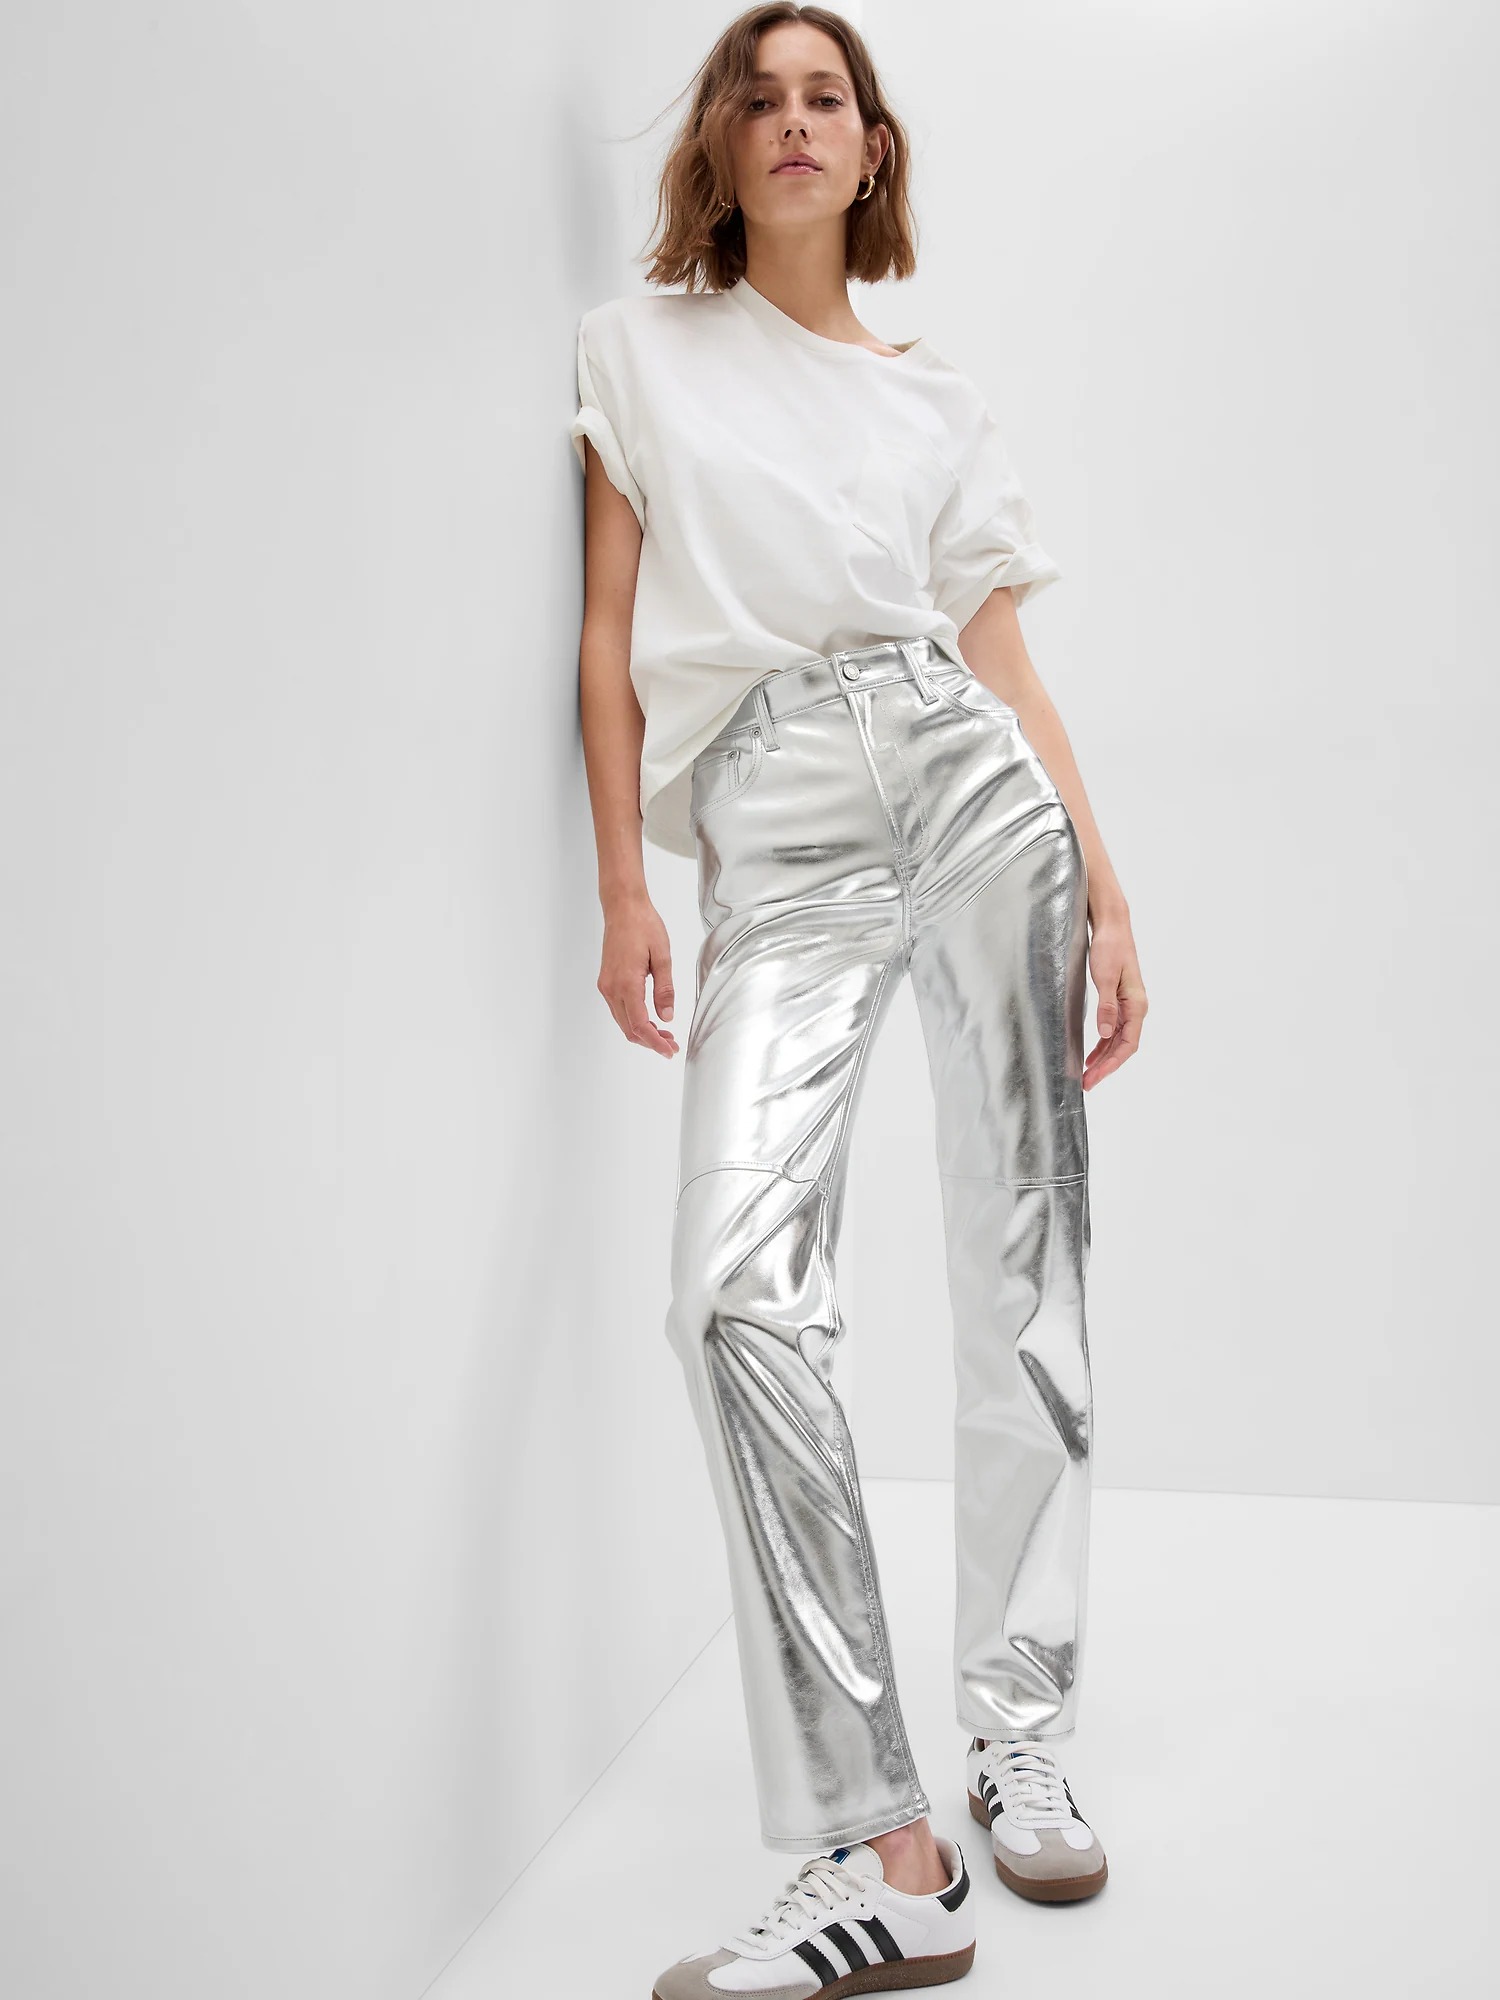 The Metallic Trend Fashion People Are Wearing This Spring | Who What Wear